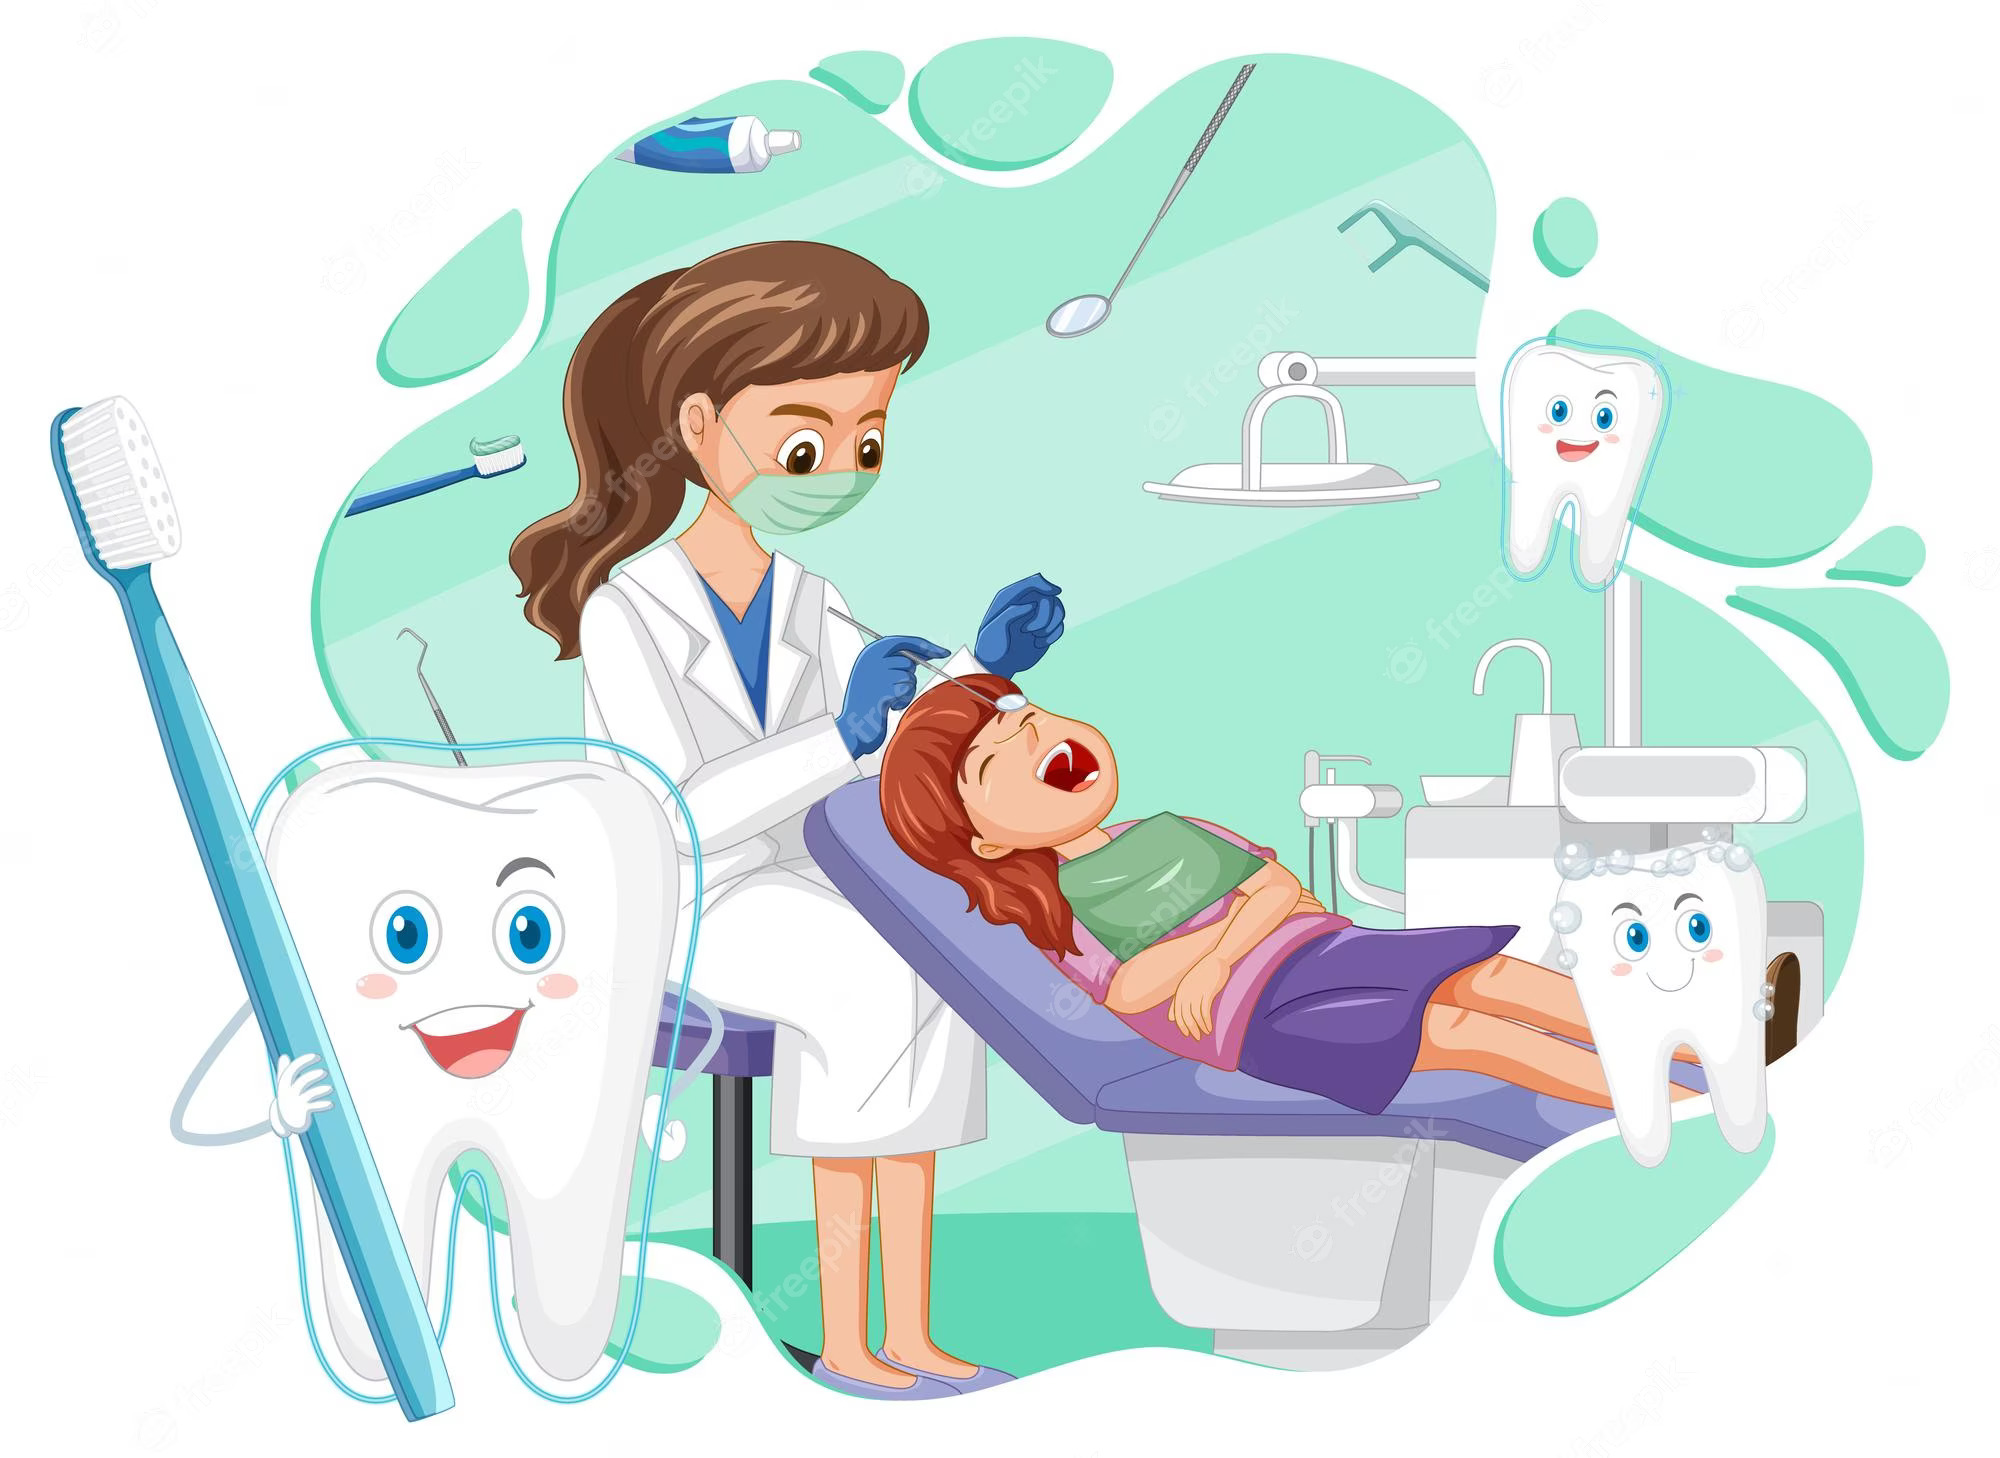 Dentist Website Development in Sydney - A Complete Guide for Dentists